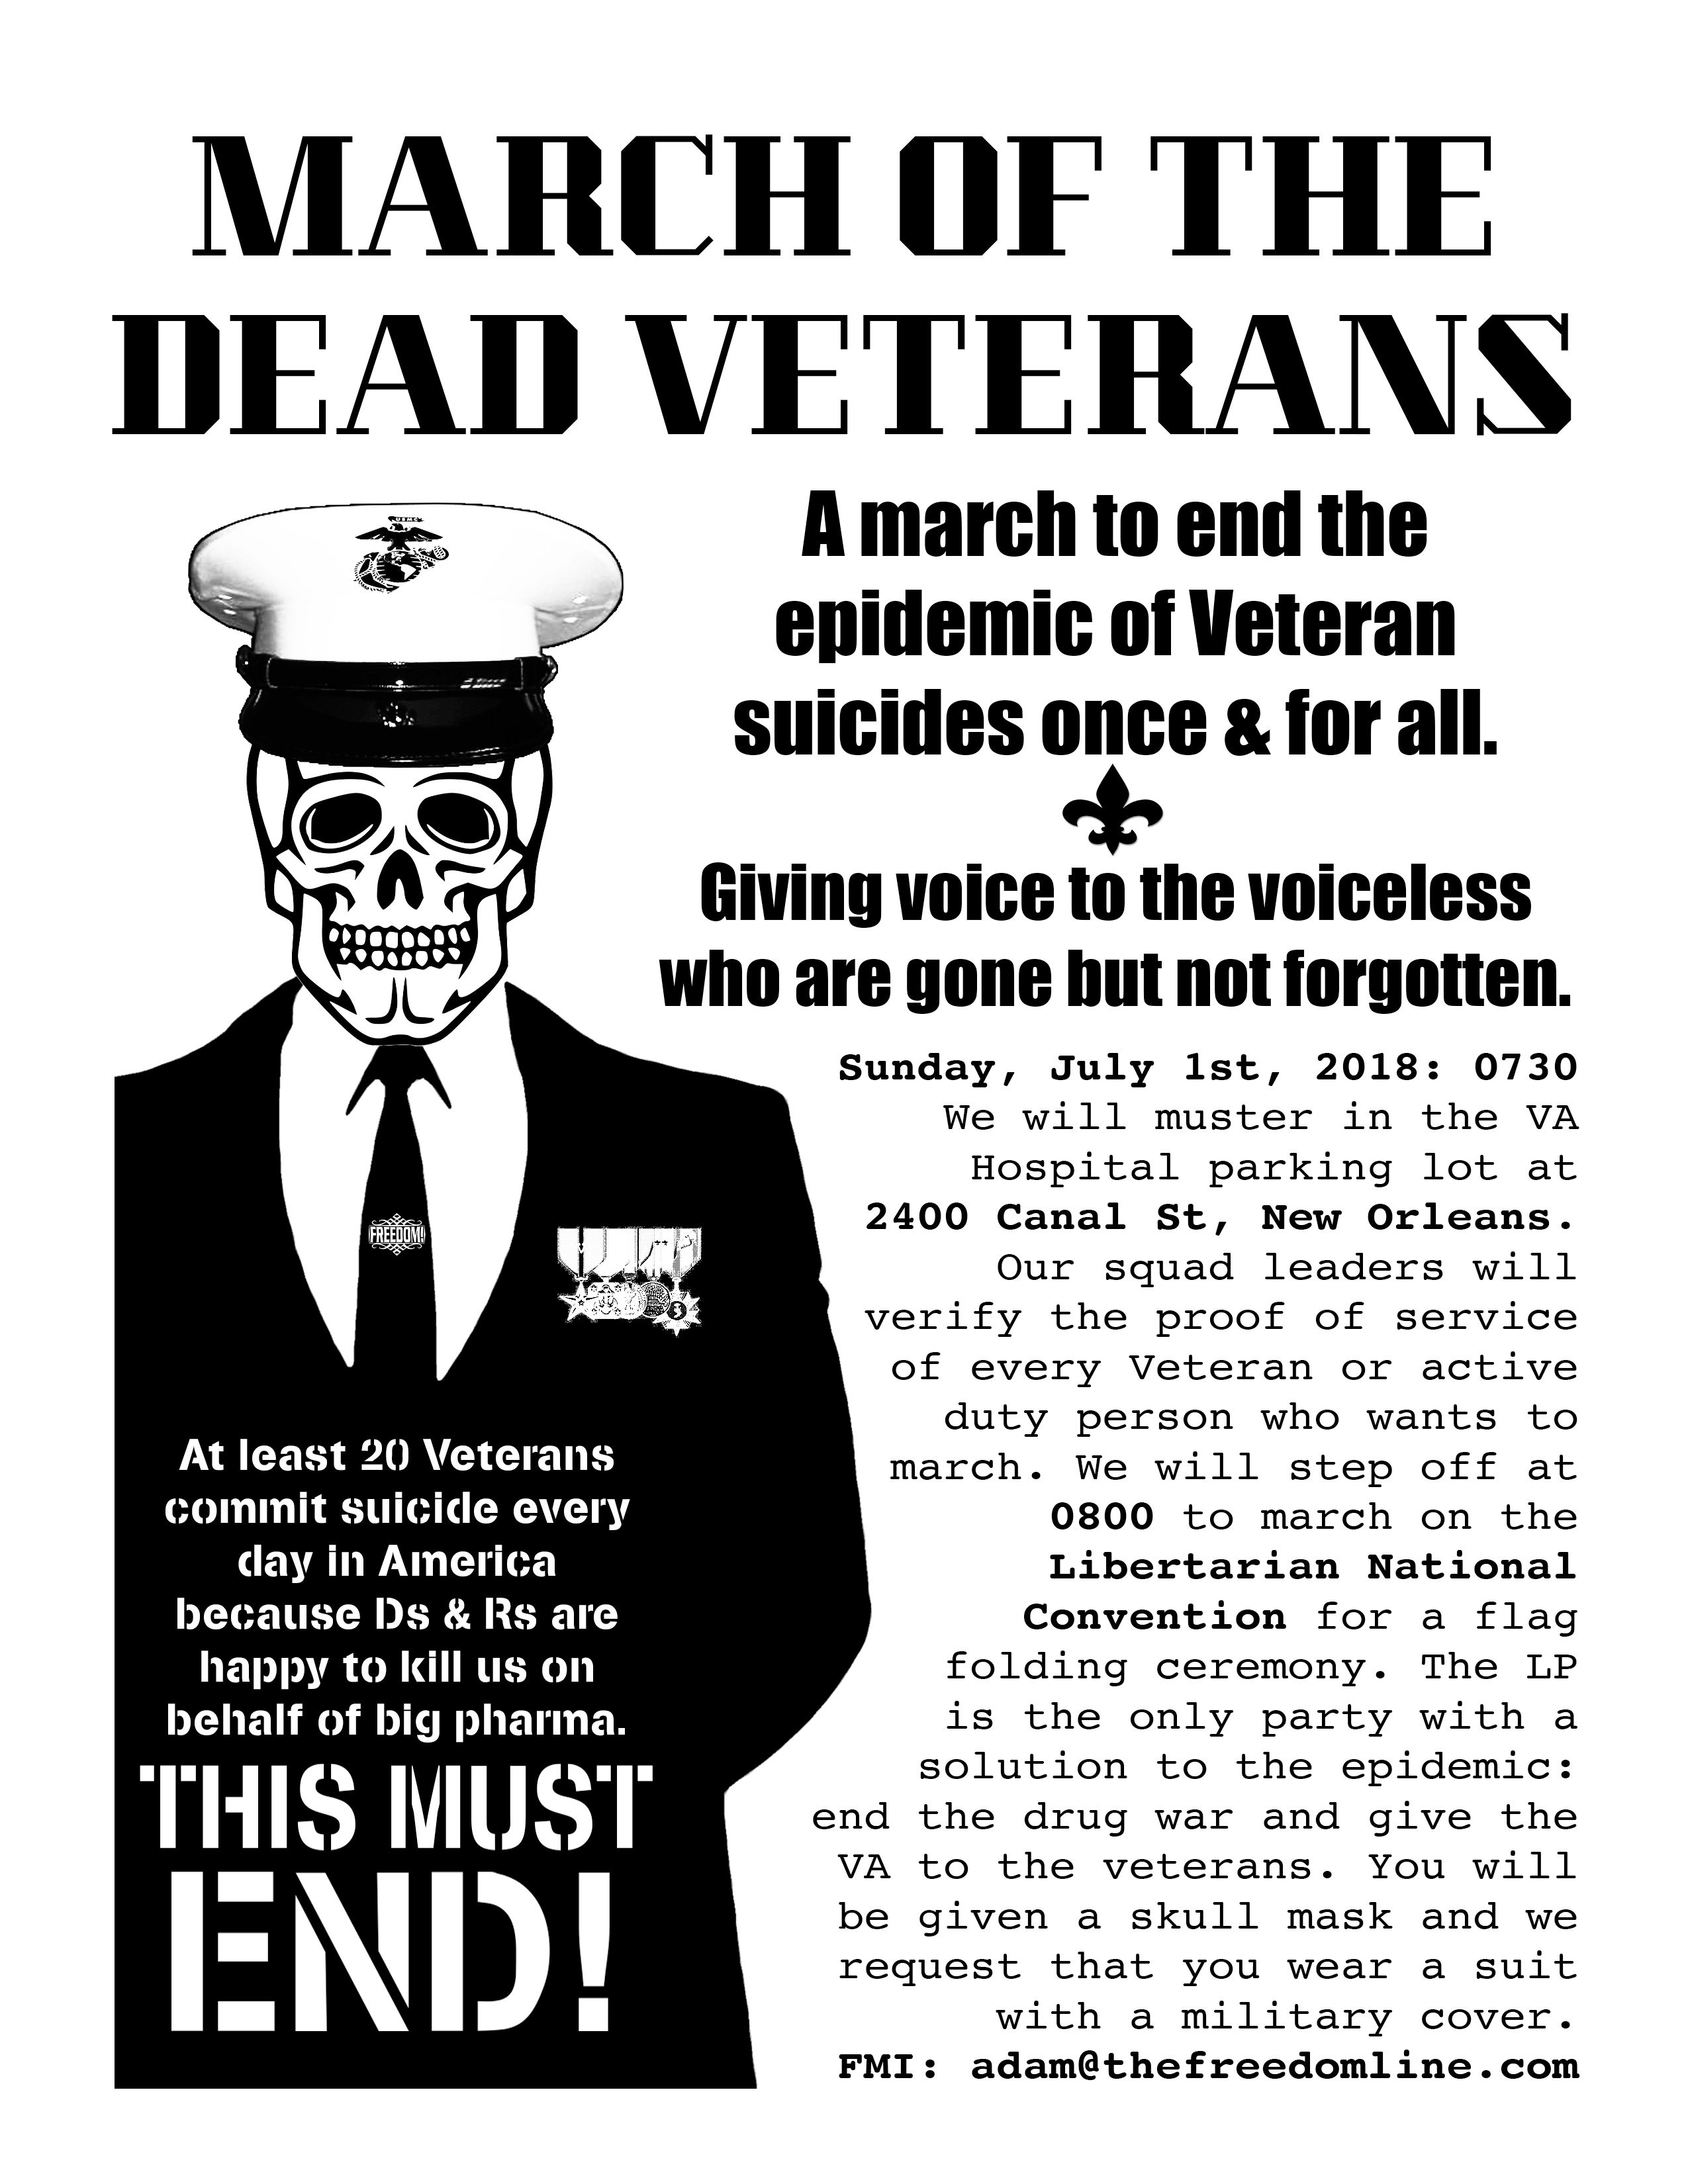 https://thefreedomline.com/2018/04/12/march-of-the-dead-veterans/